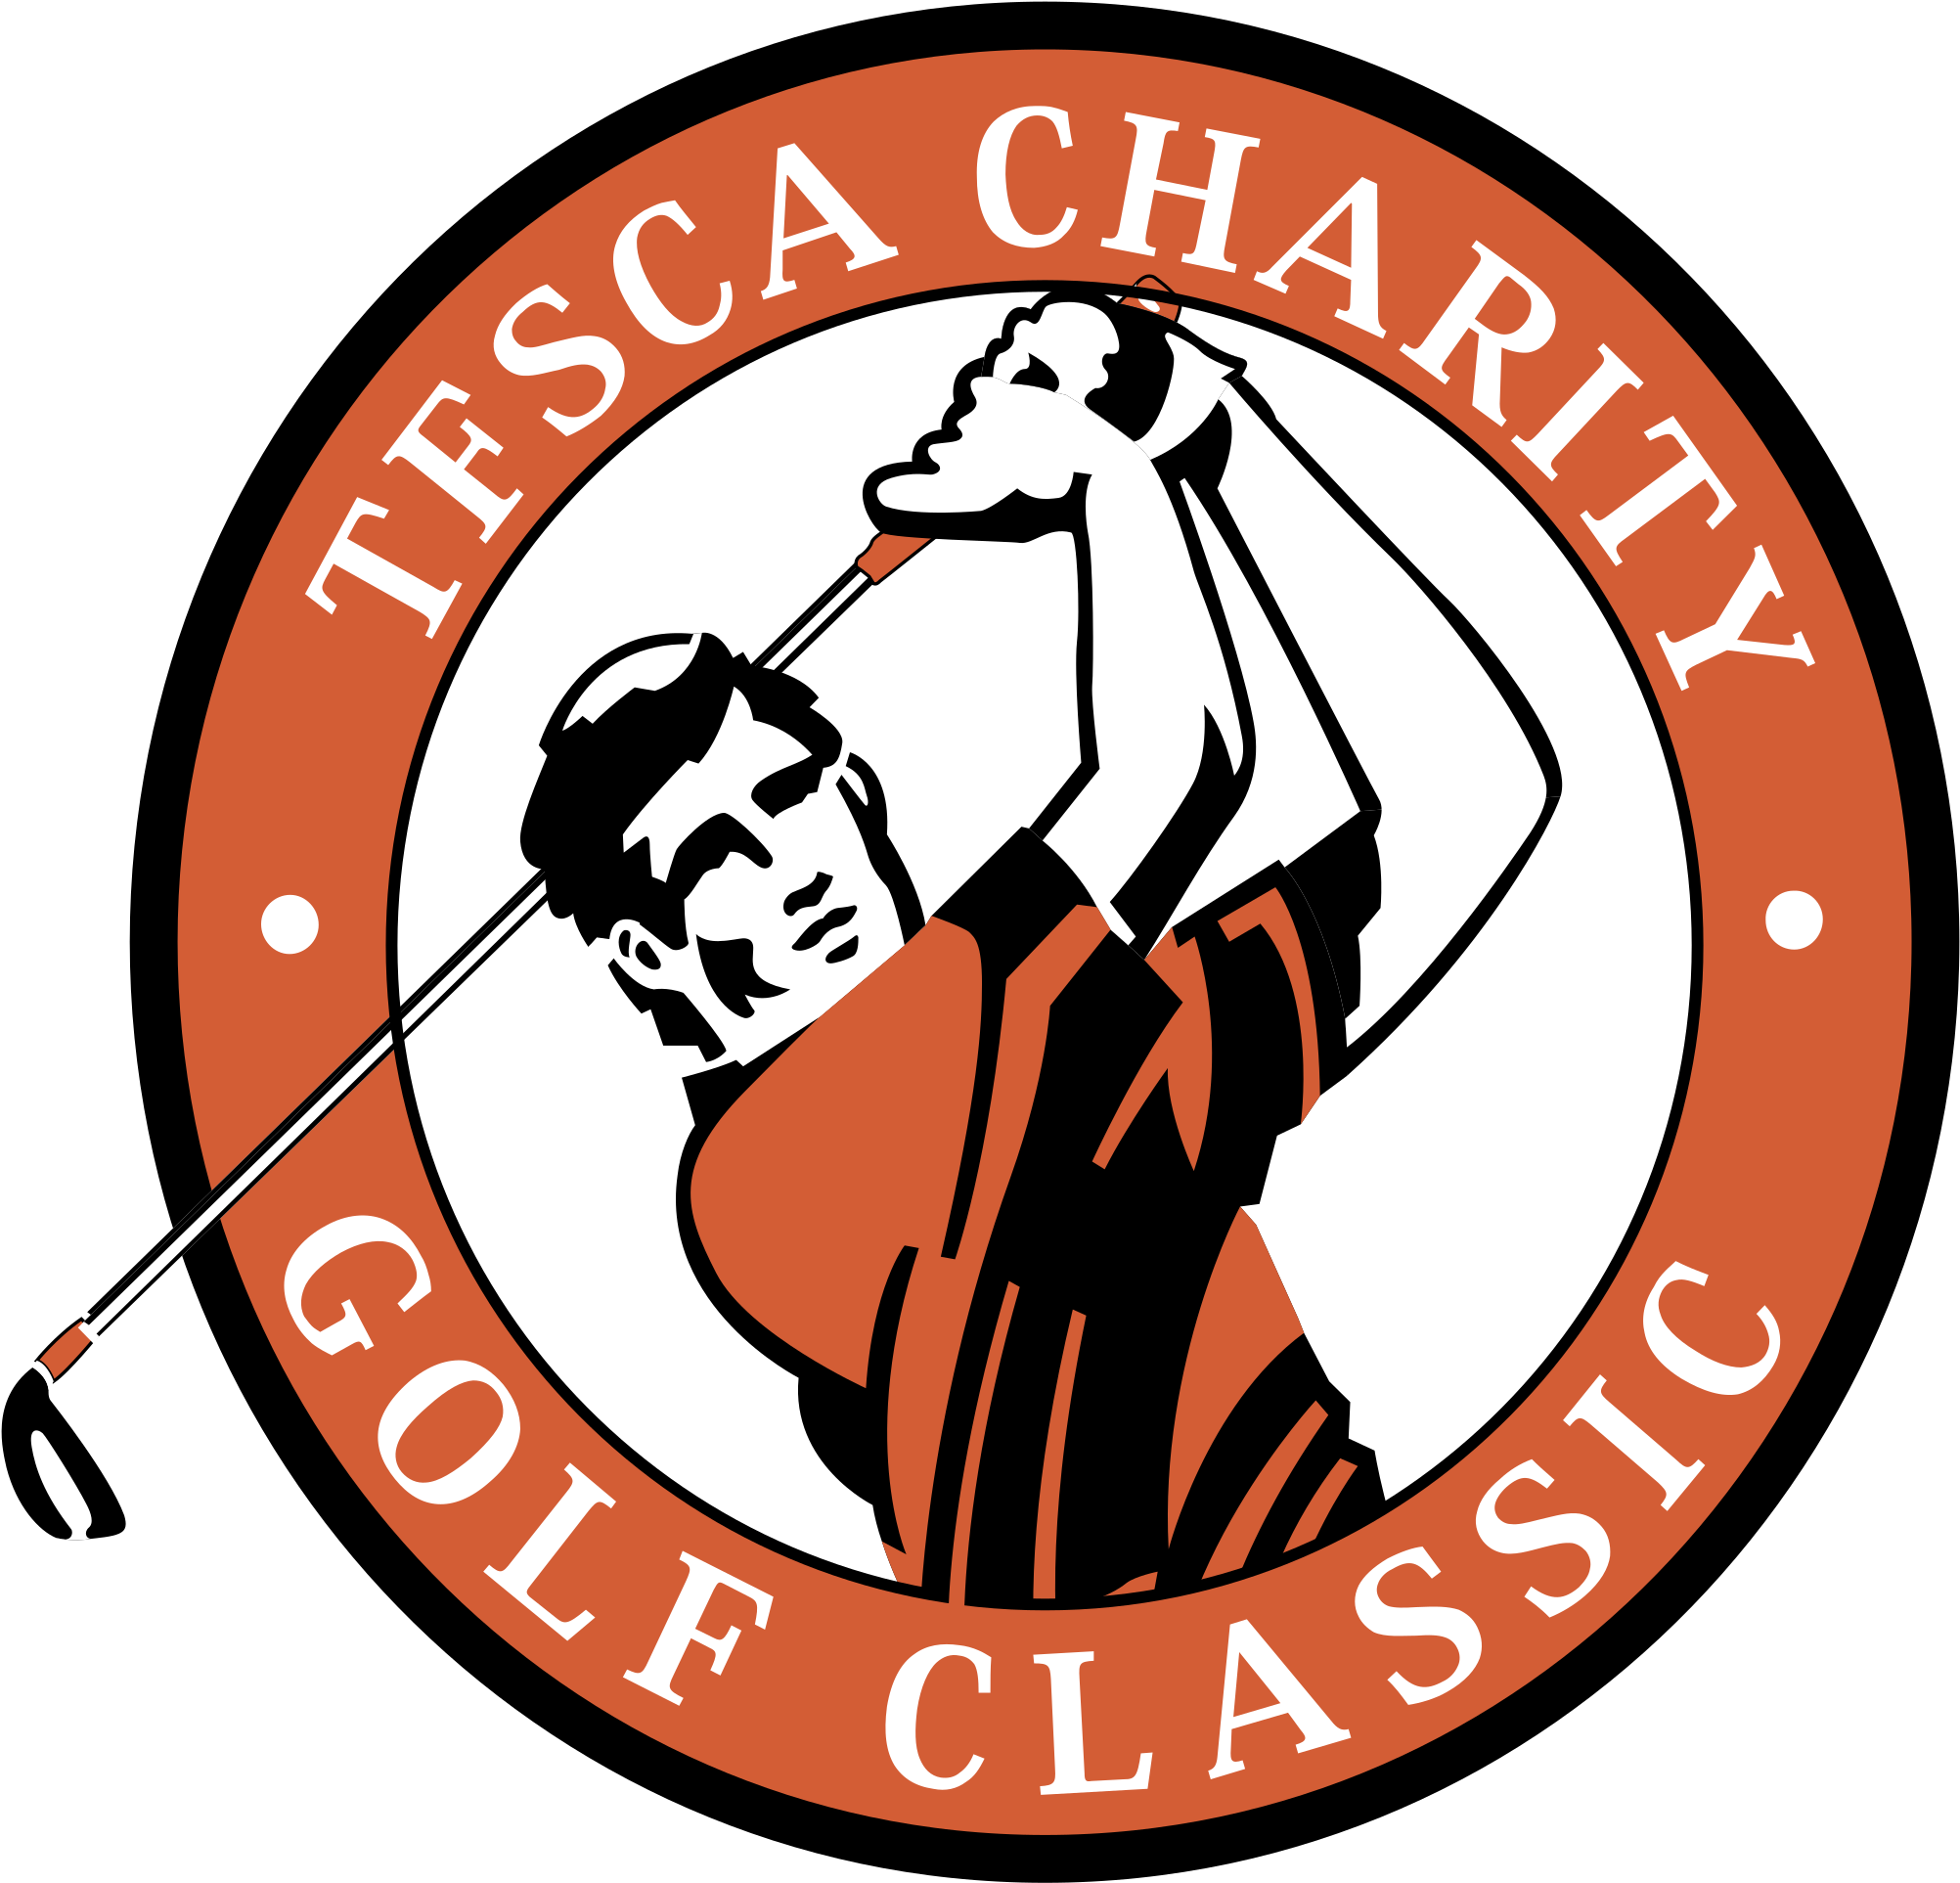 Tesca Charity Golf Classic Logo Black And White - Best Promotions 22 Oz. Stadium Cup (2400x2400)